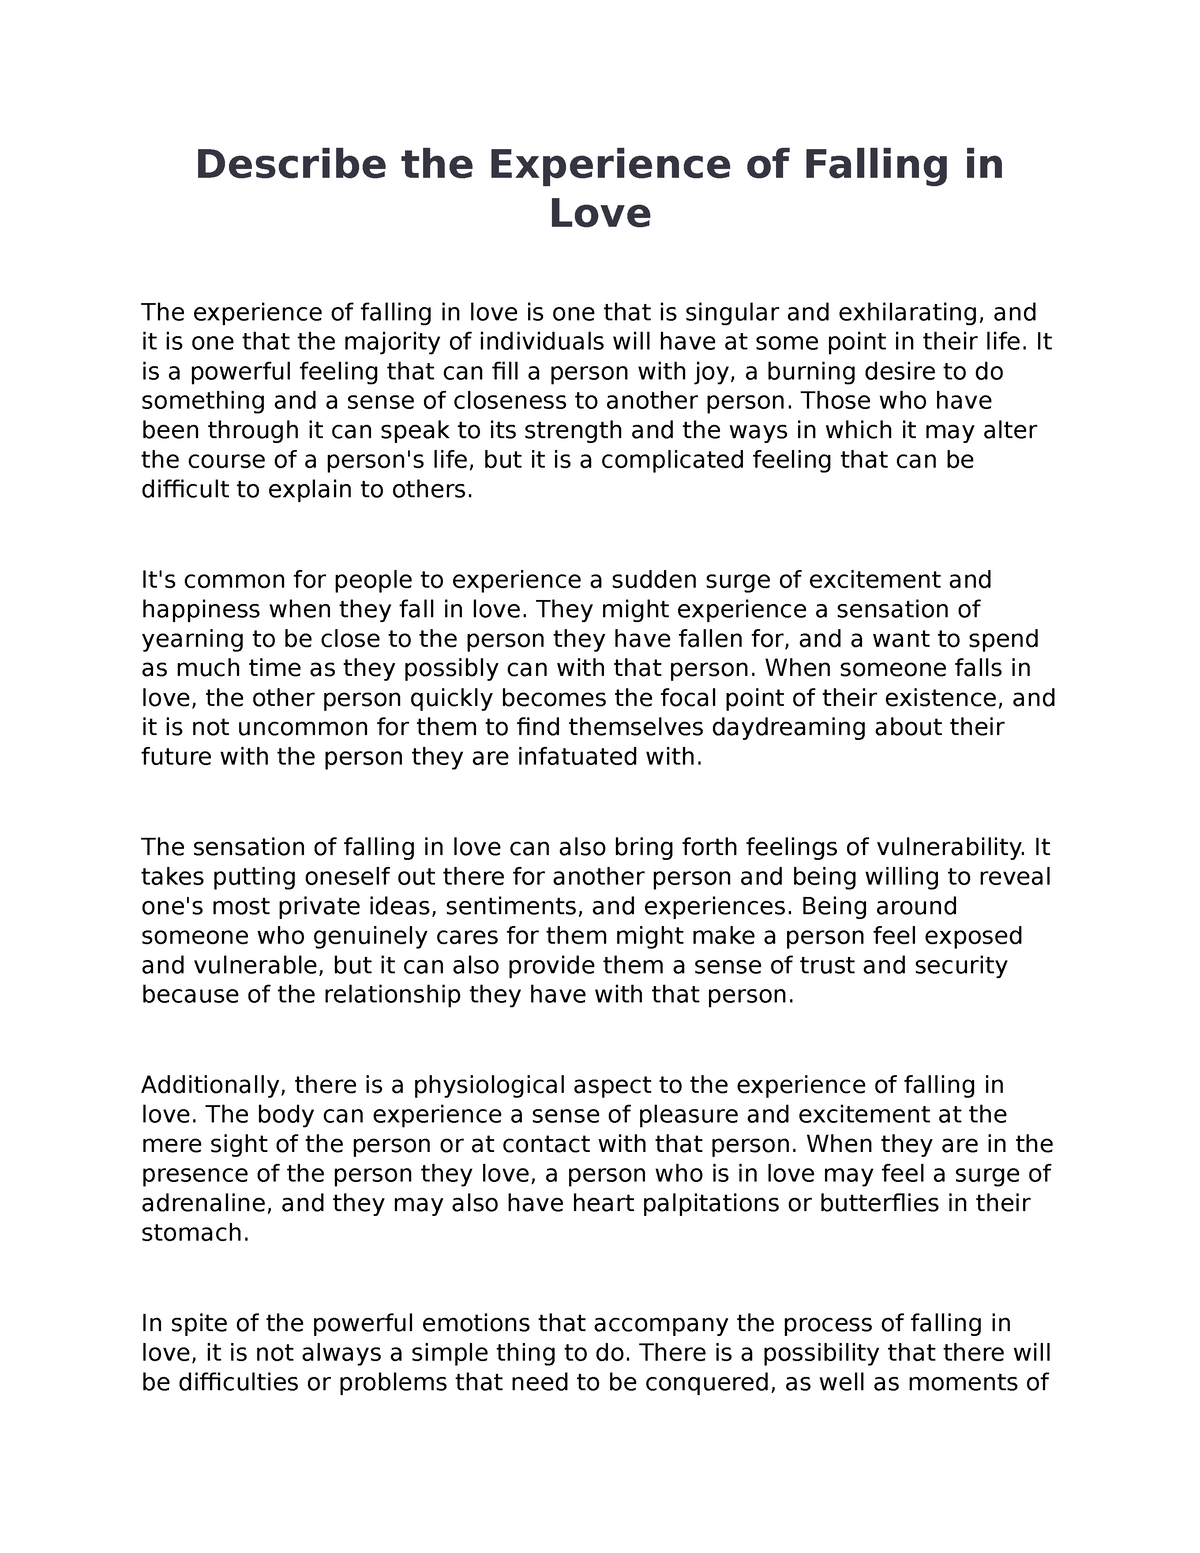 narrative essay about falling in love